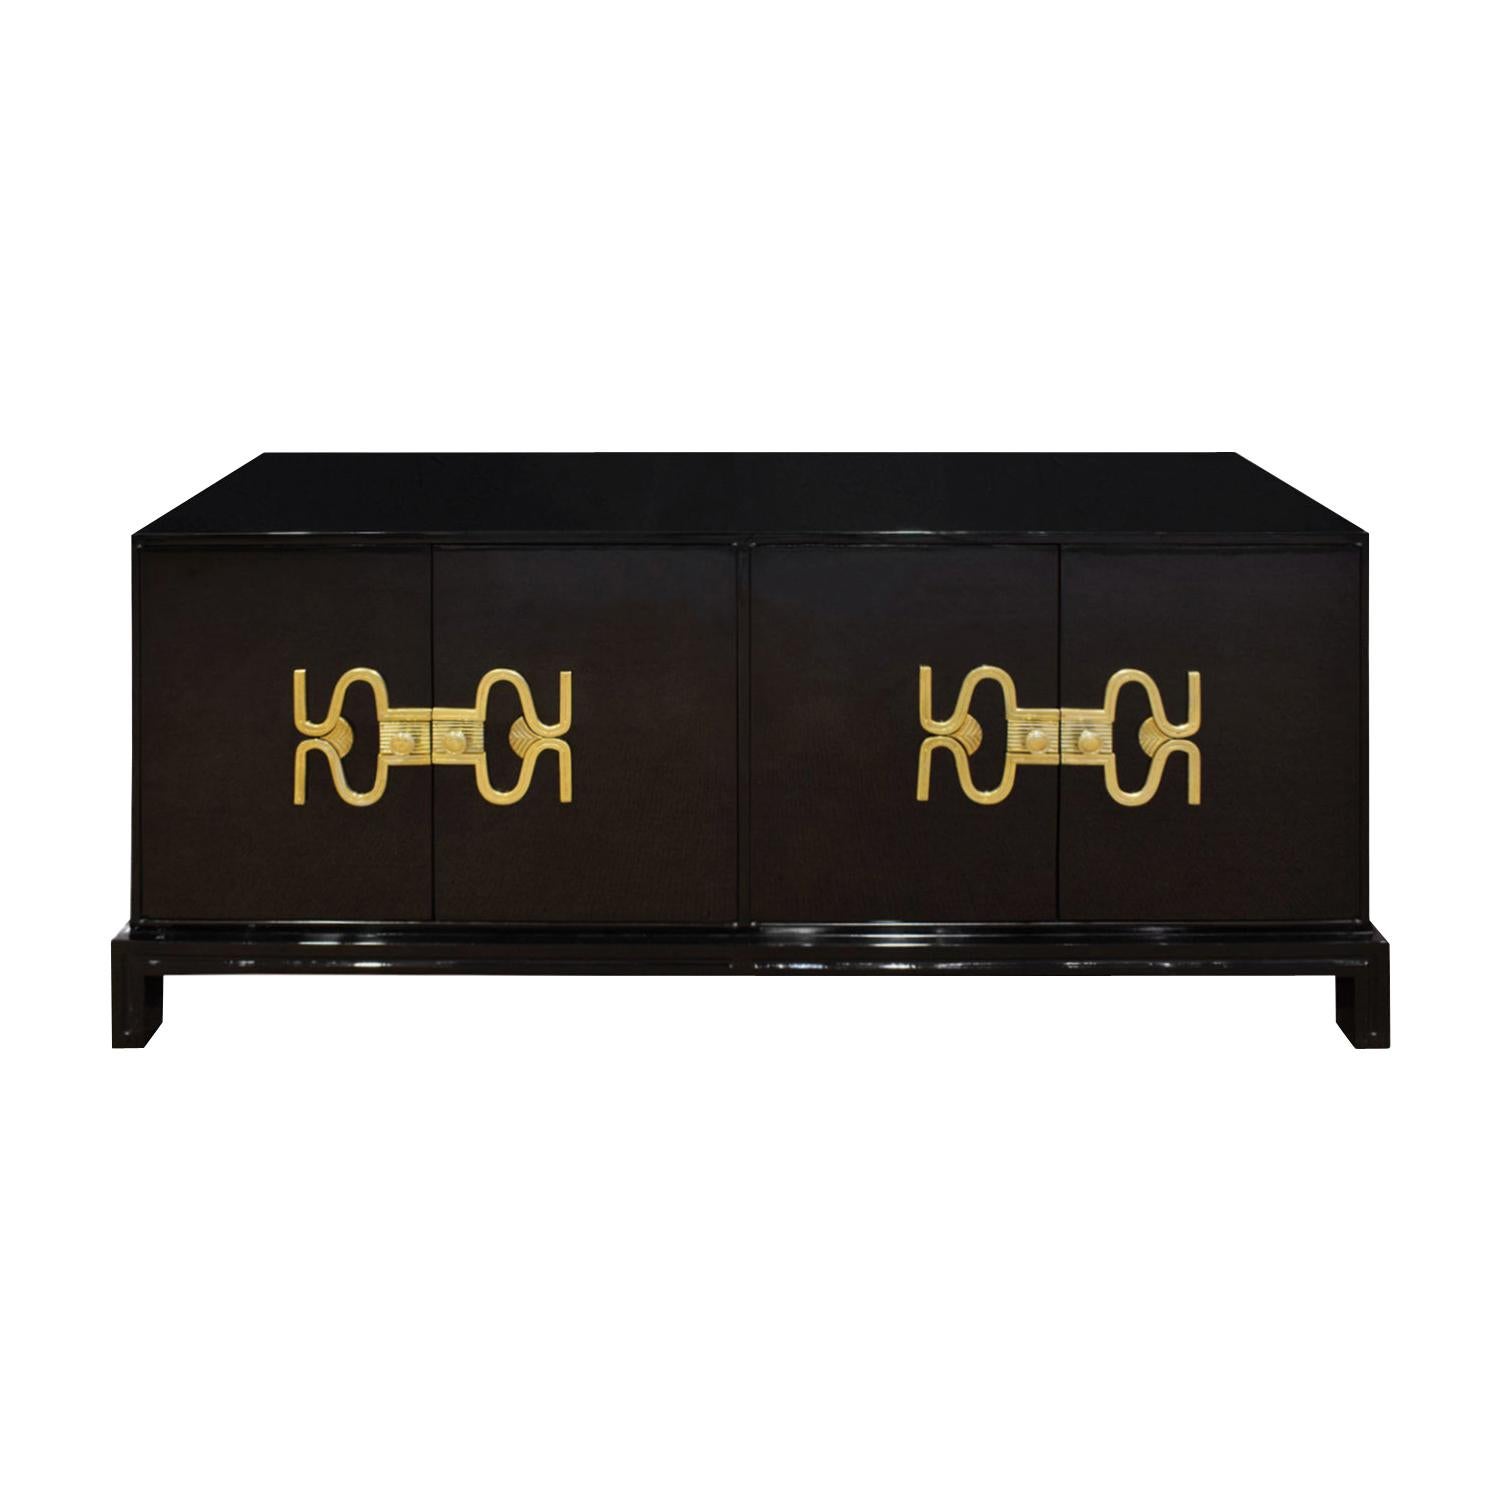 Tommi Parzinger Rare Black Lacquered Credenza with Brass Hardware, 1960s